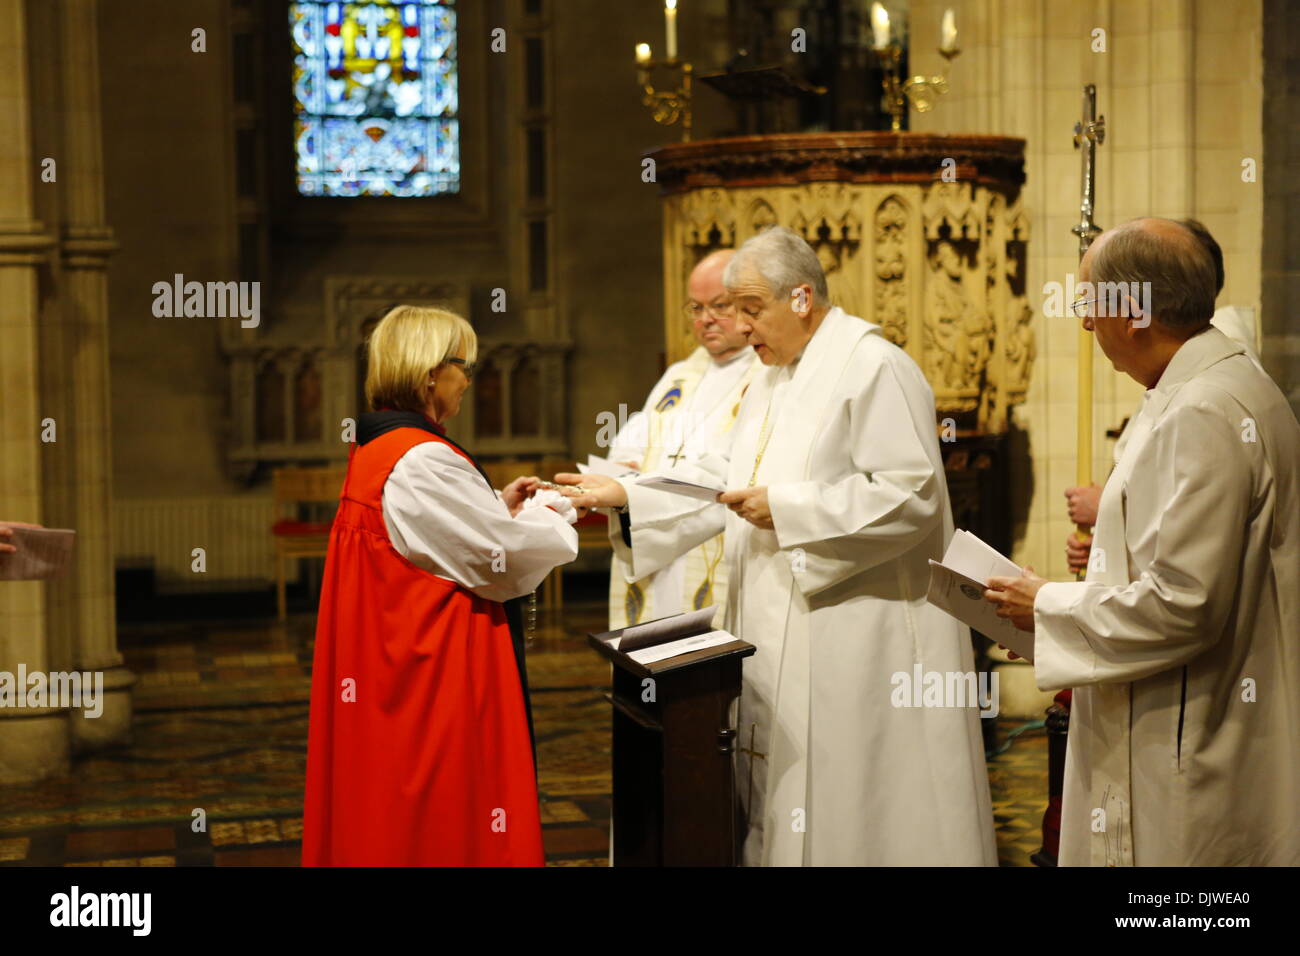 Dublin, Ireland. 30th November 2013. The bishop of Meath and Kildare the Most Revd Pat Storey (L) receives her Bishop's Cross from the Archbishop of Dublin, the Most Revd Dr Michael Jackson (R). The Most Revd Pat Storey has been consecrated as Church of Ireland Bishop of Meath and Kildare in Dublin's Christ Church Cathedral. Credit:  Michael Debets/Alamy Live News Stock Photo